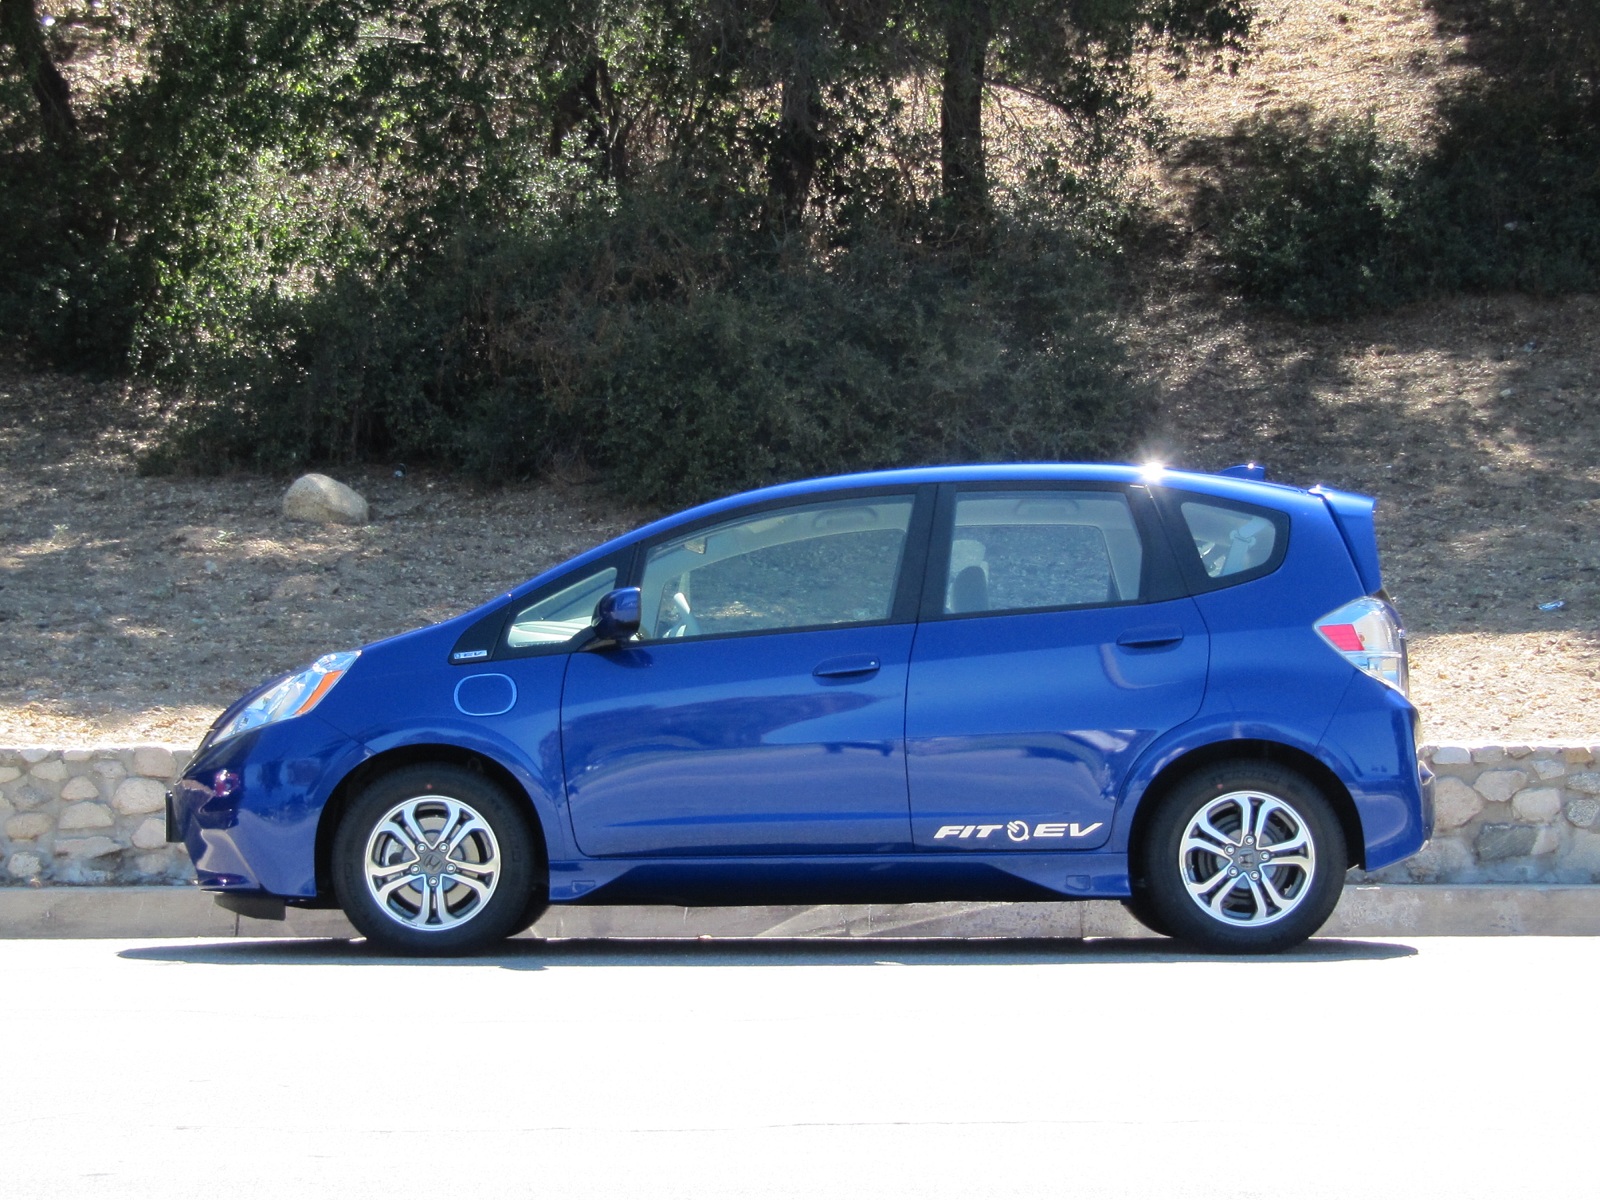 2014 Honda Fit EV: Model Year Ends Early As Last Cars Are Built